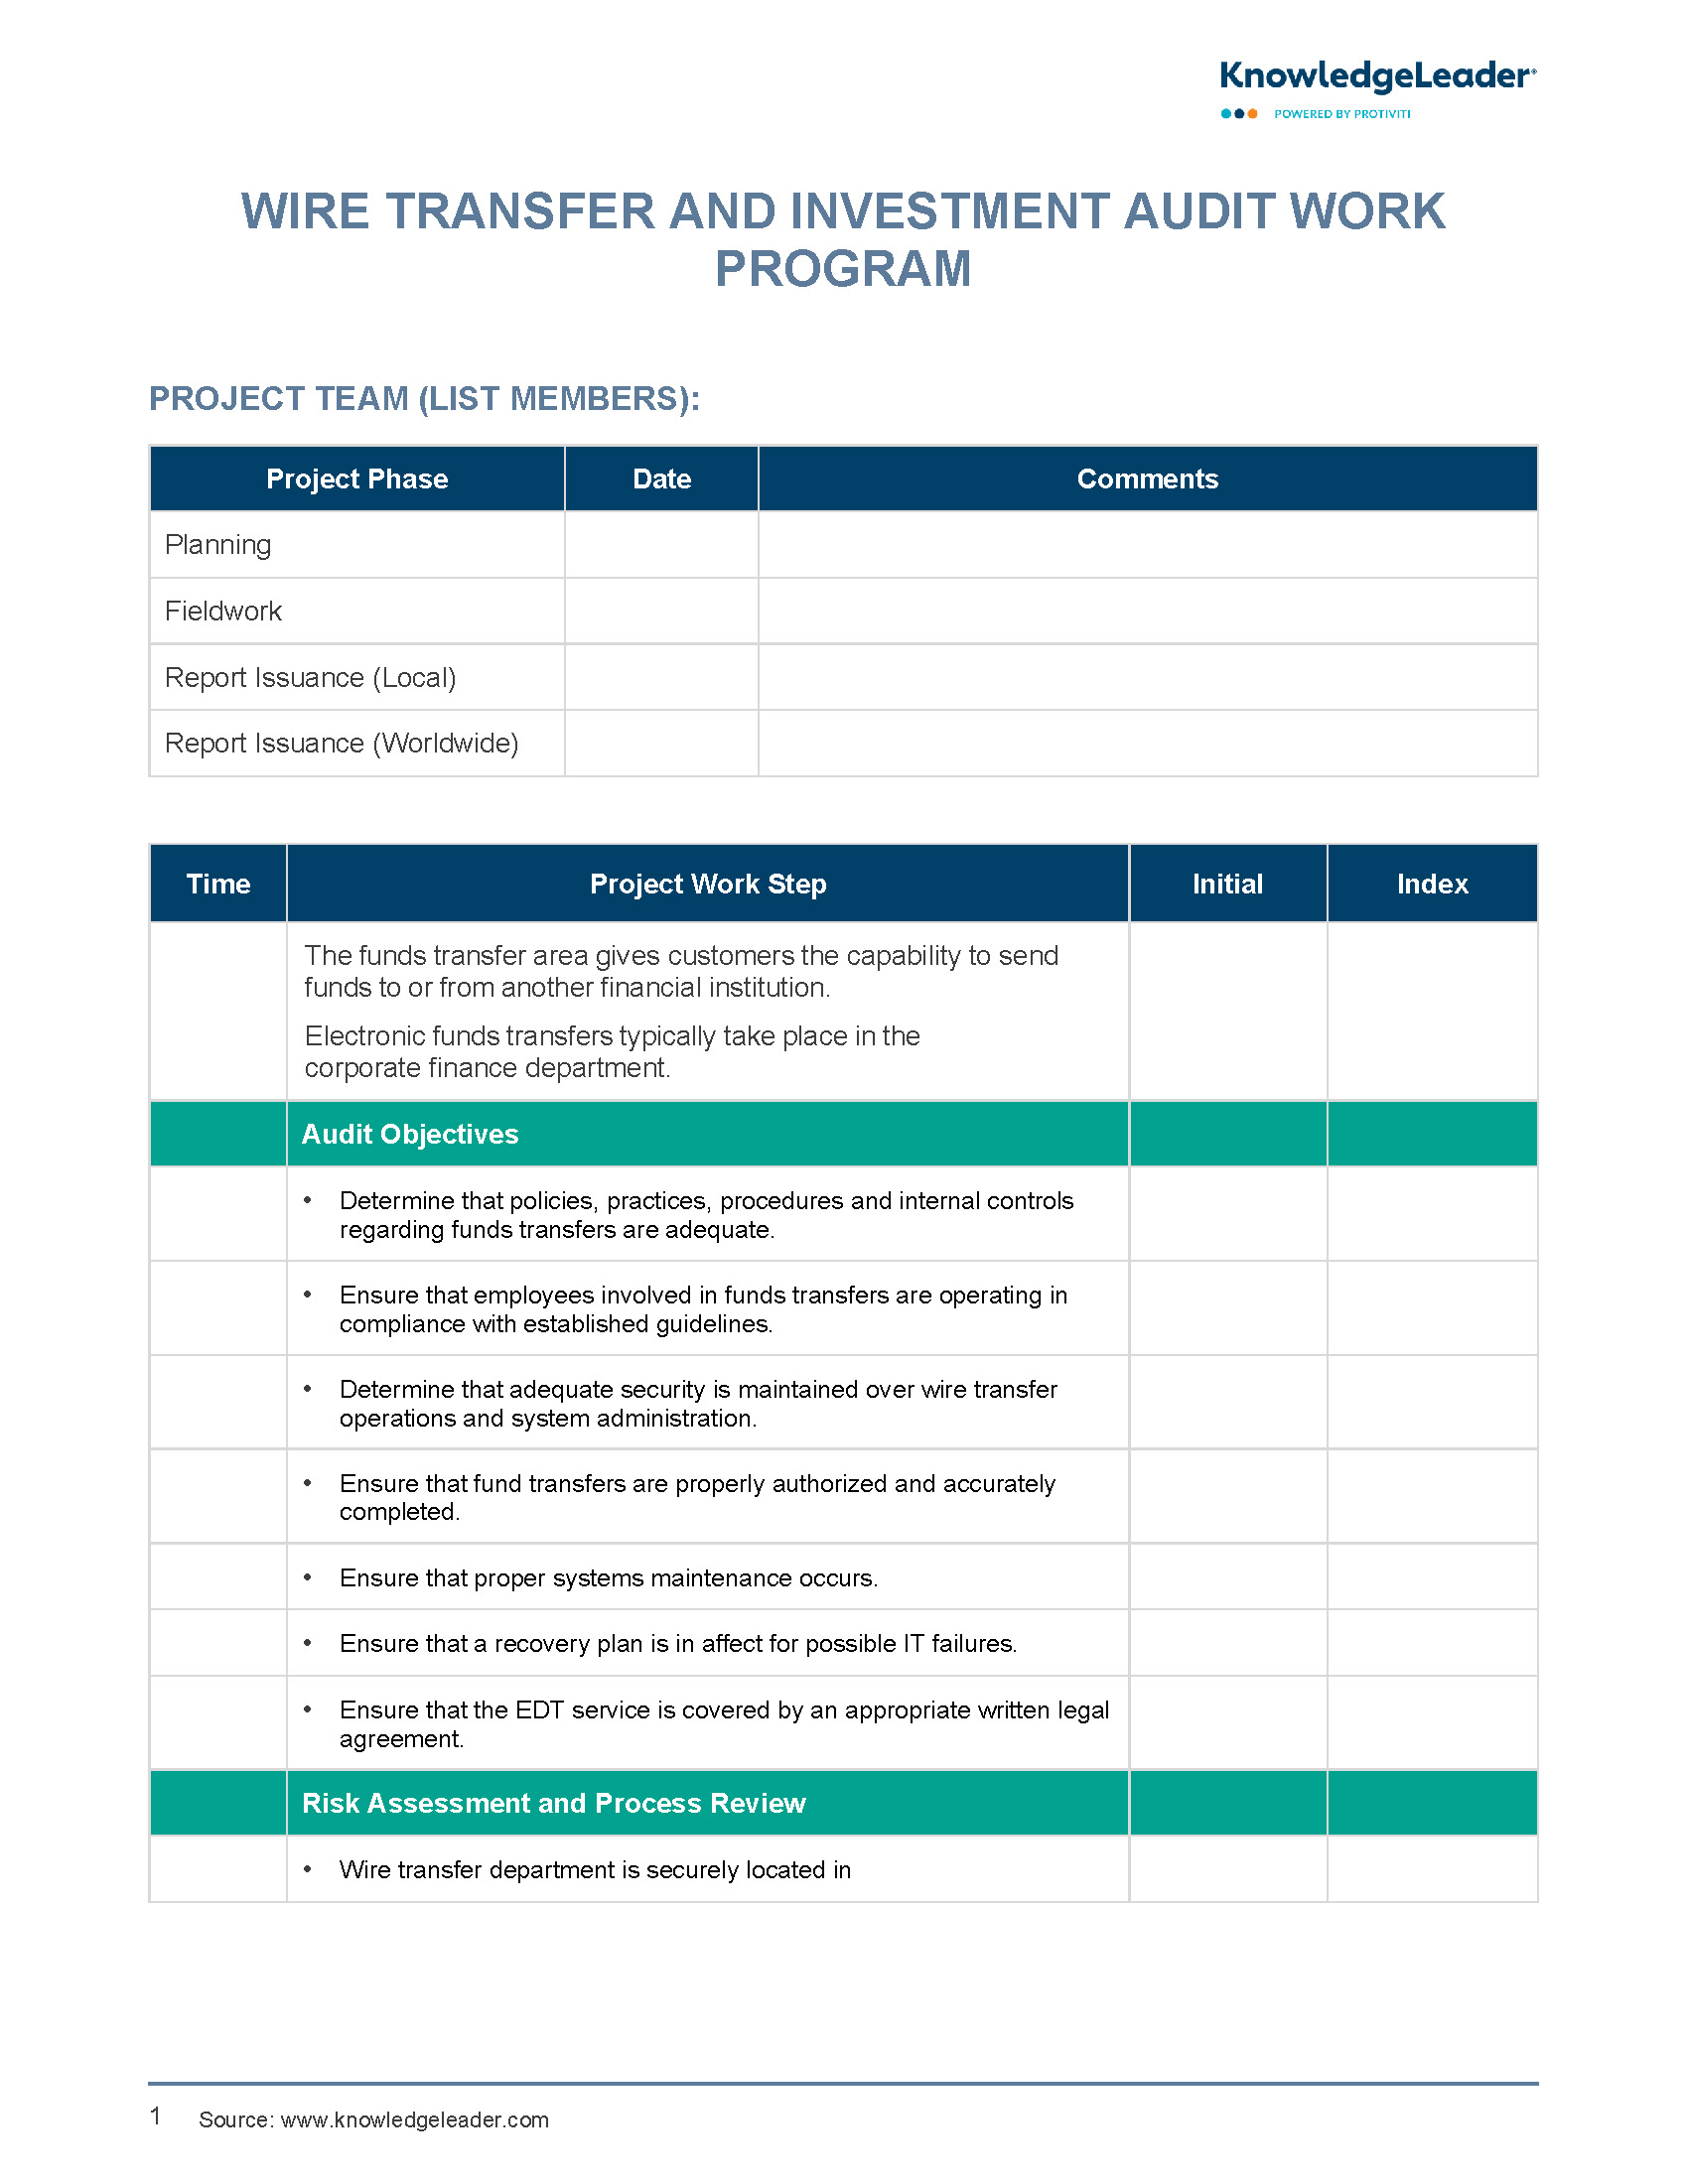 Screenshot of the first page of Wire Transfer and Investment Work Program